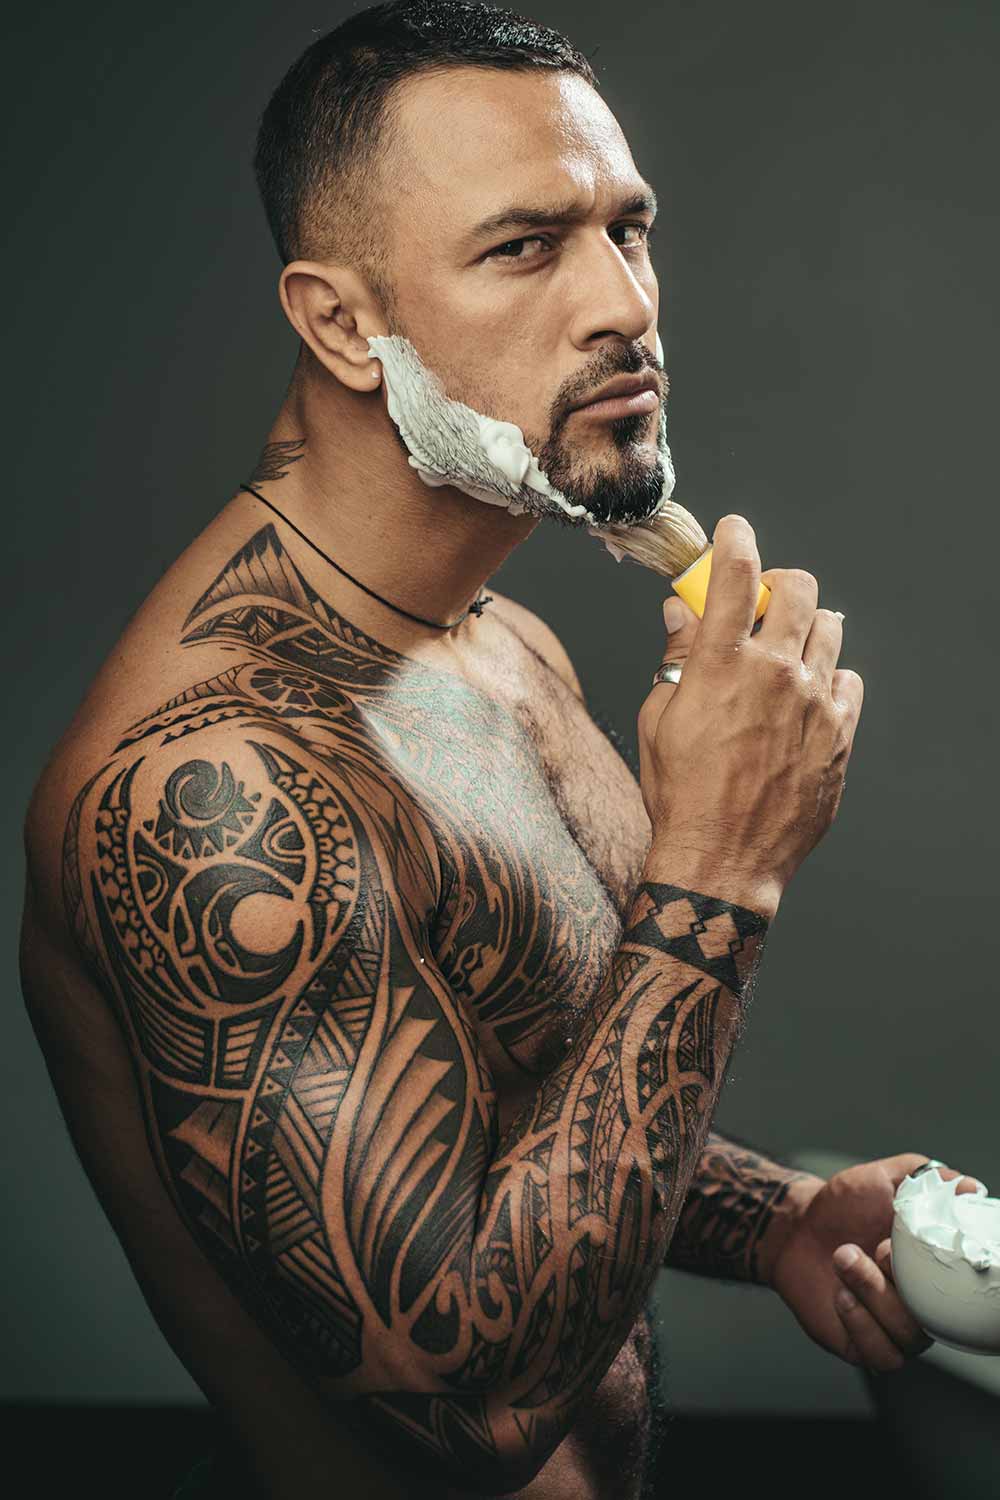 98 Tattoo Ideas For Men To Copy In 2023 - Mens Haircuts